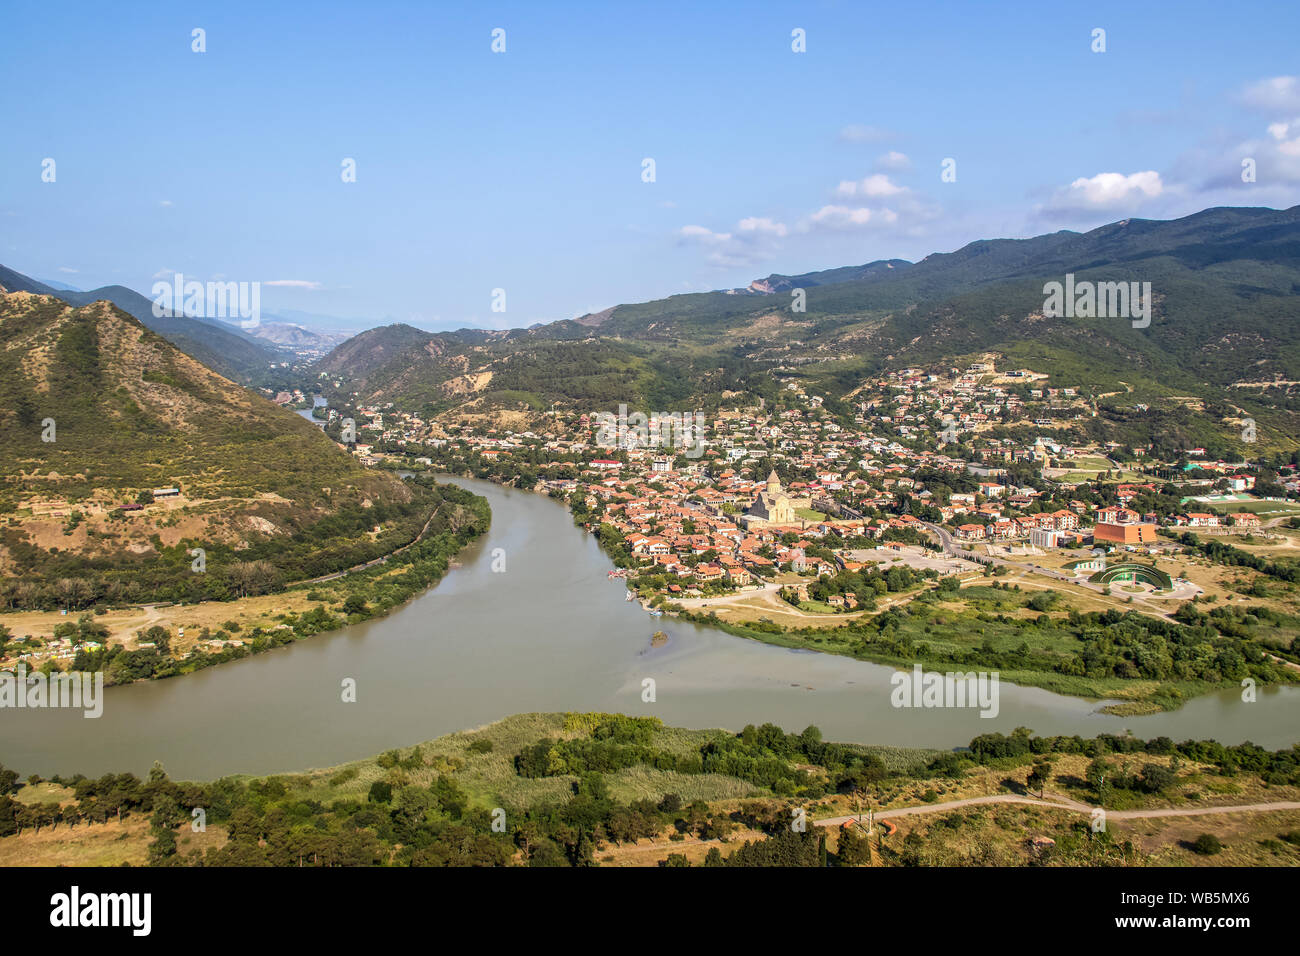 Confluence of the Mtkvari and Aragvi rivers viewed from above at Mtskheta - one of the oldest cities in Georgia - and view of the Svetitskhoveli Cathe Stock Photo